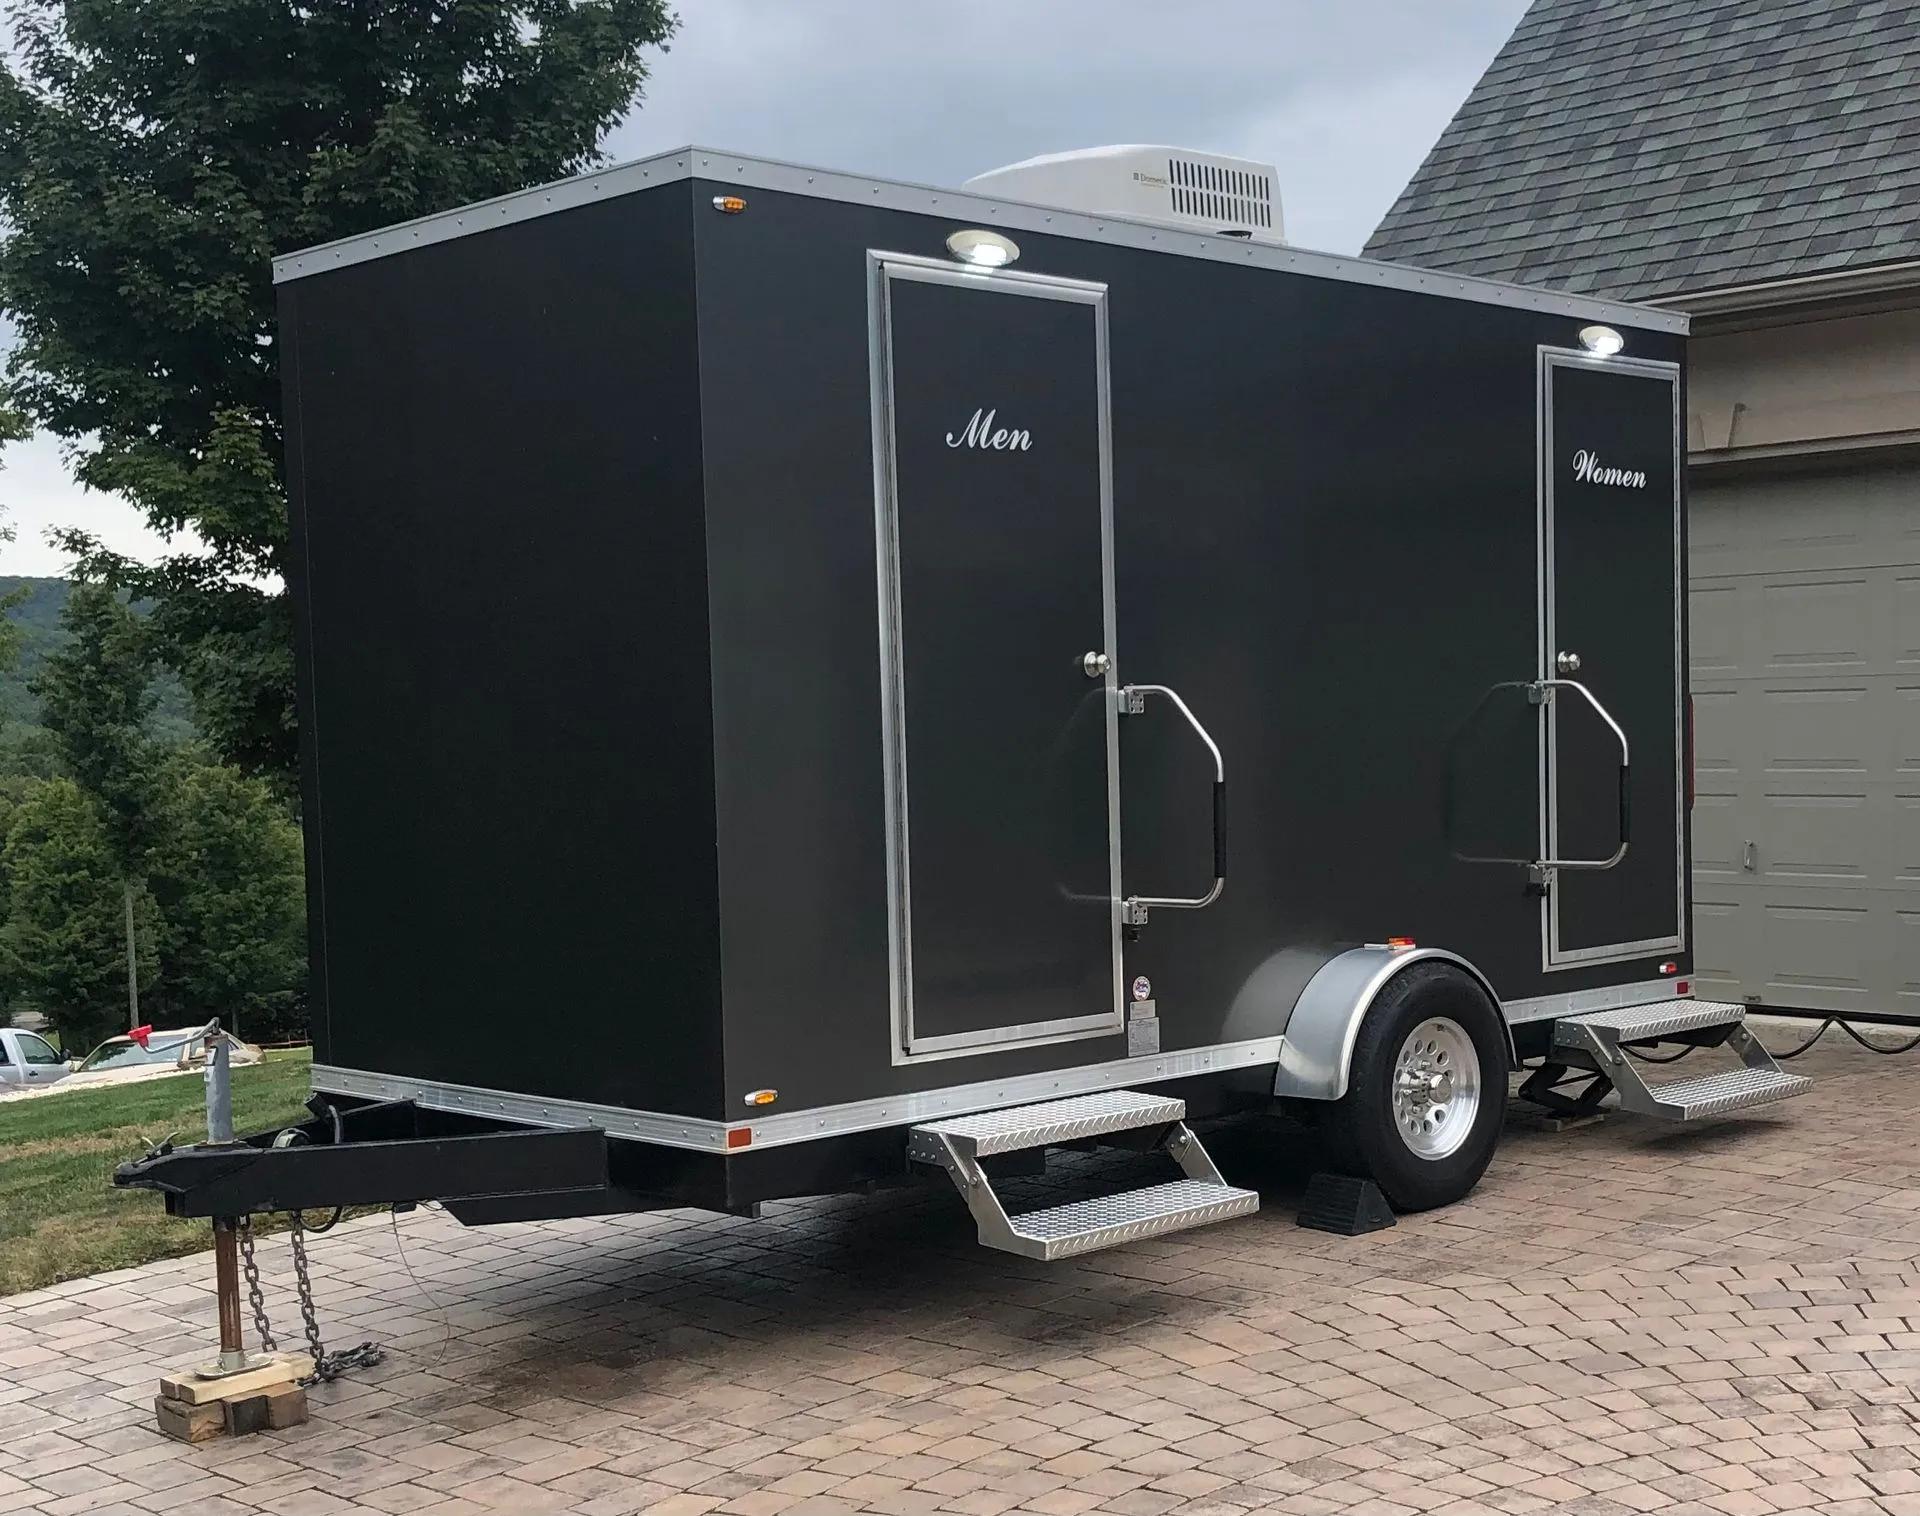 Black, small portable restroom trailer showing men's and women's room.